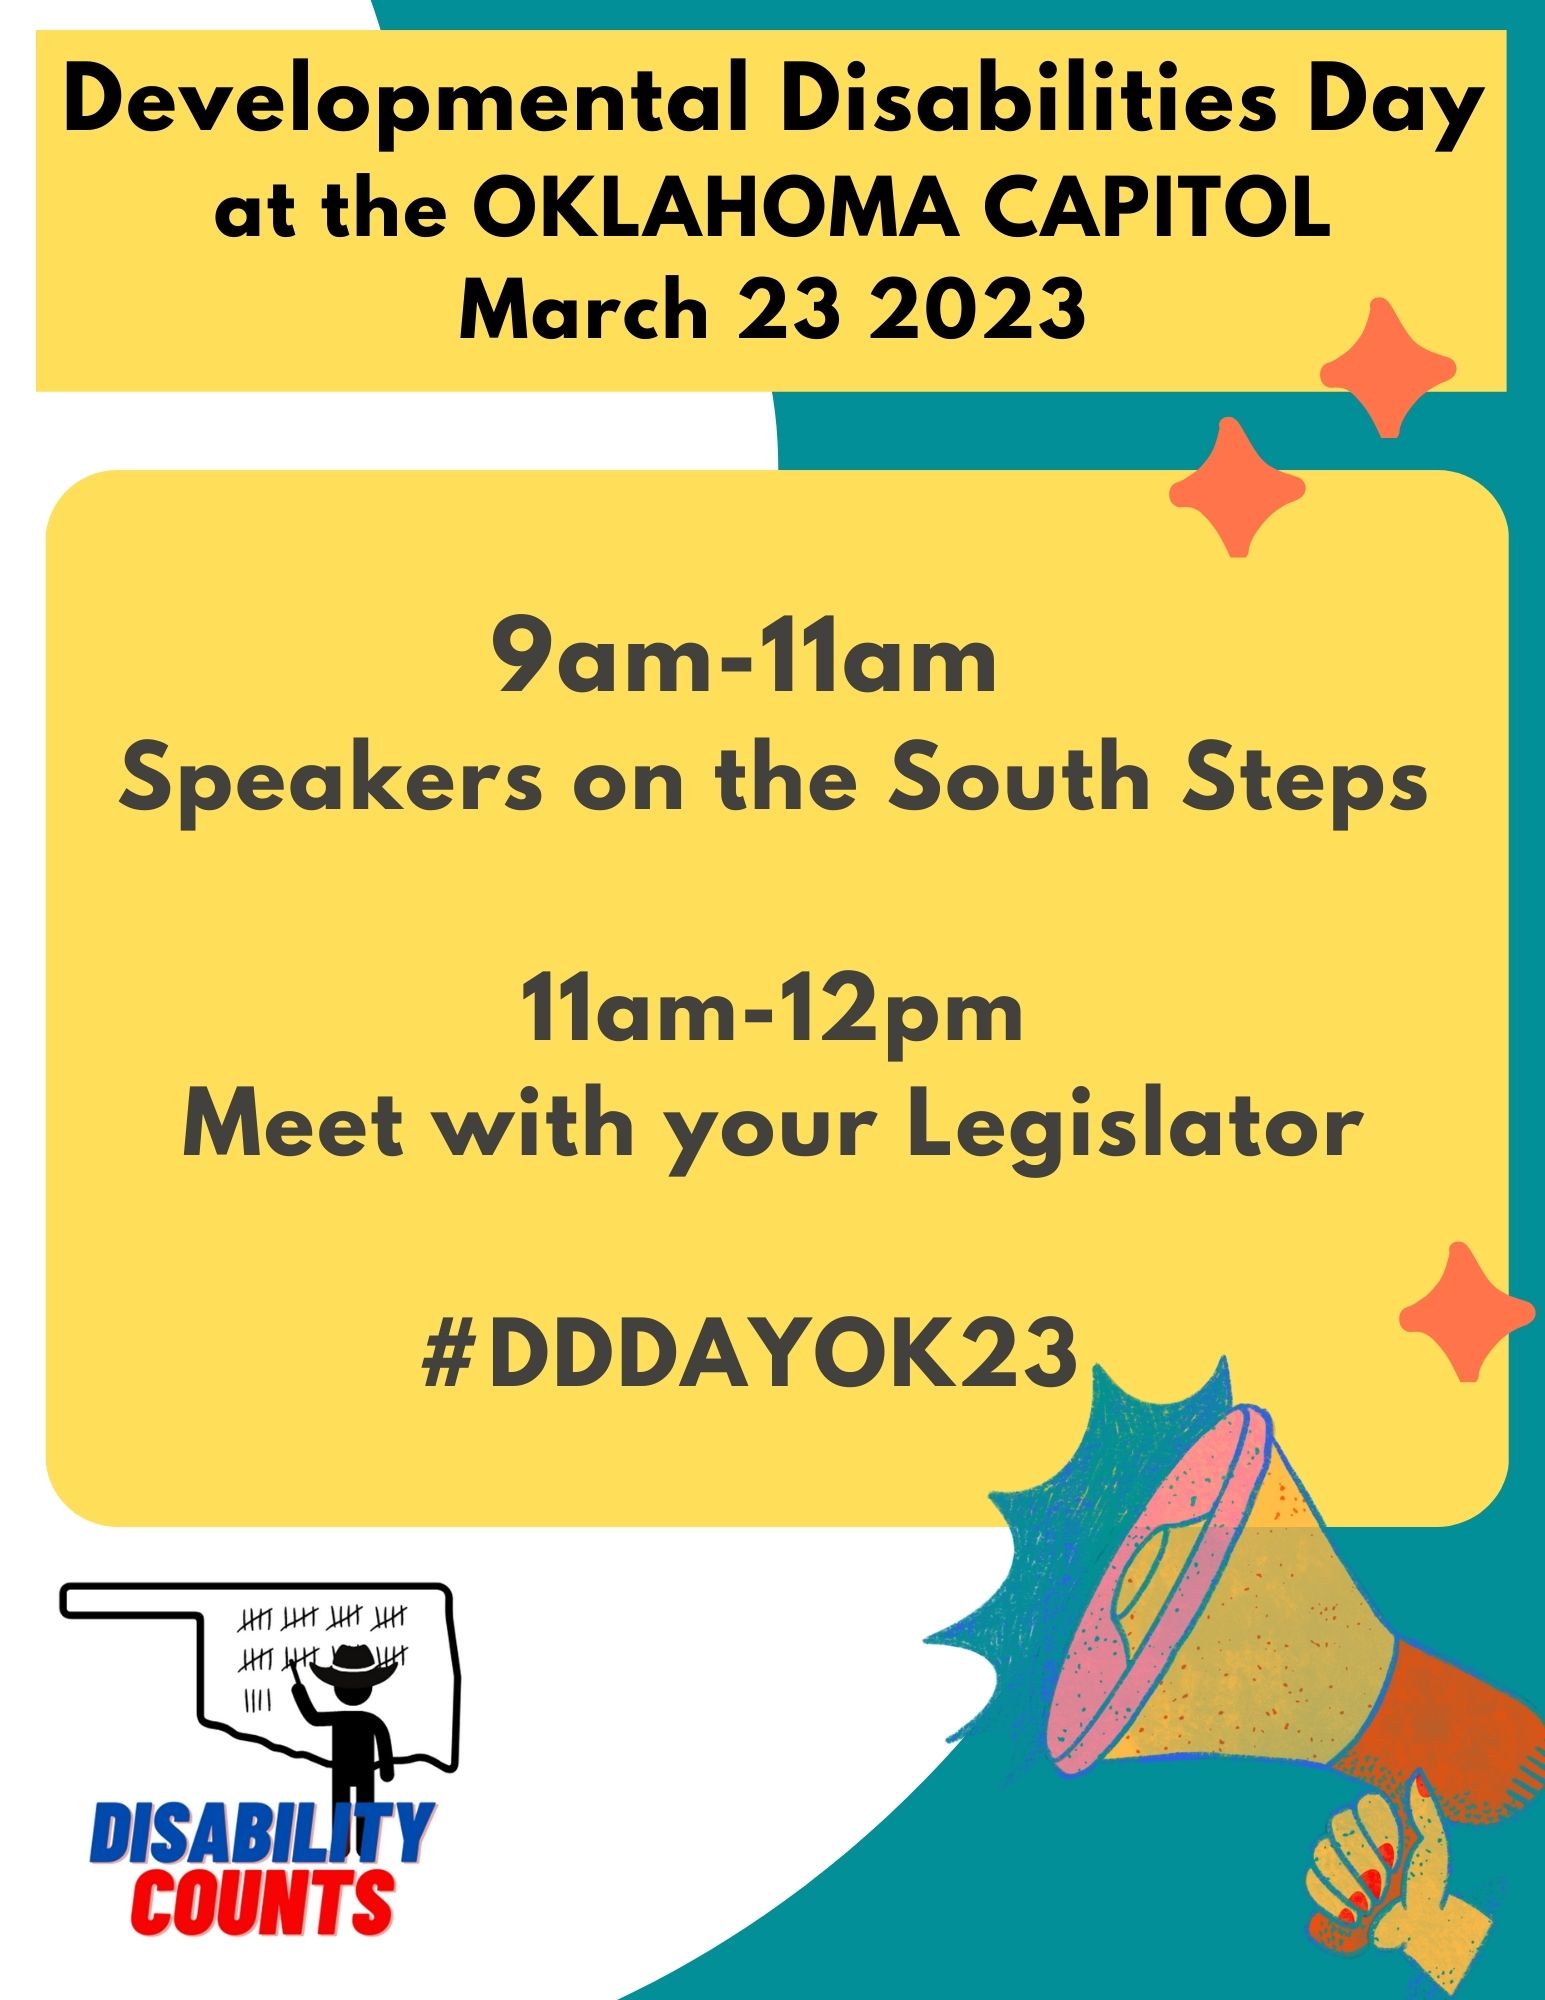 Developmental Disabilities Day at the Oklahoma Capitol on March 23rd at 9:00 a.m.